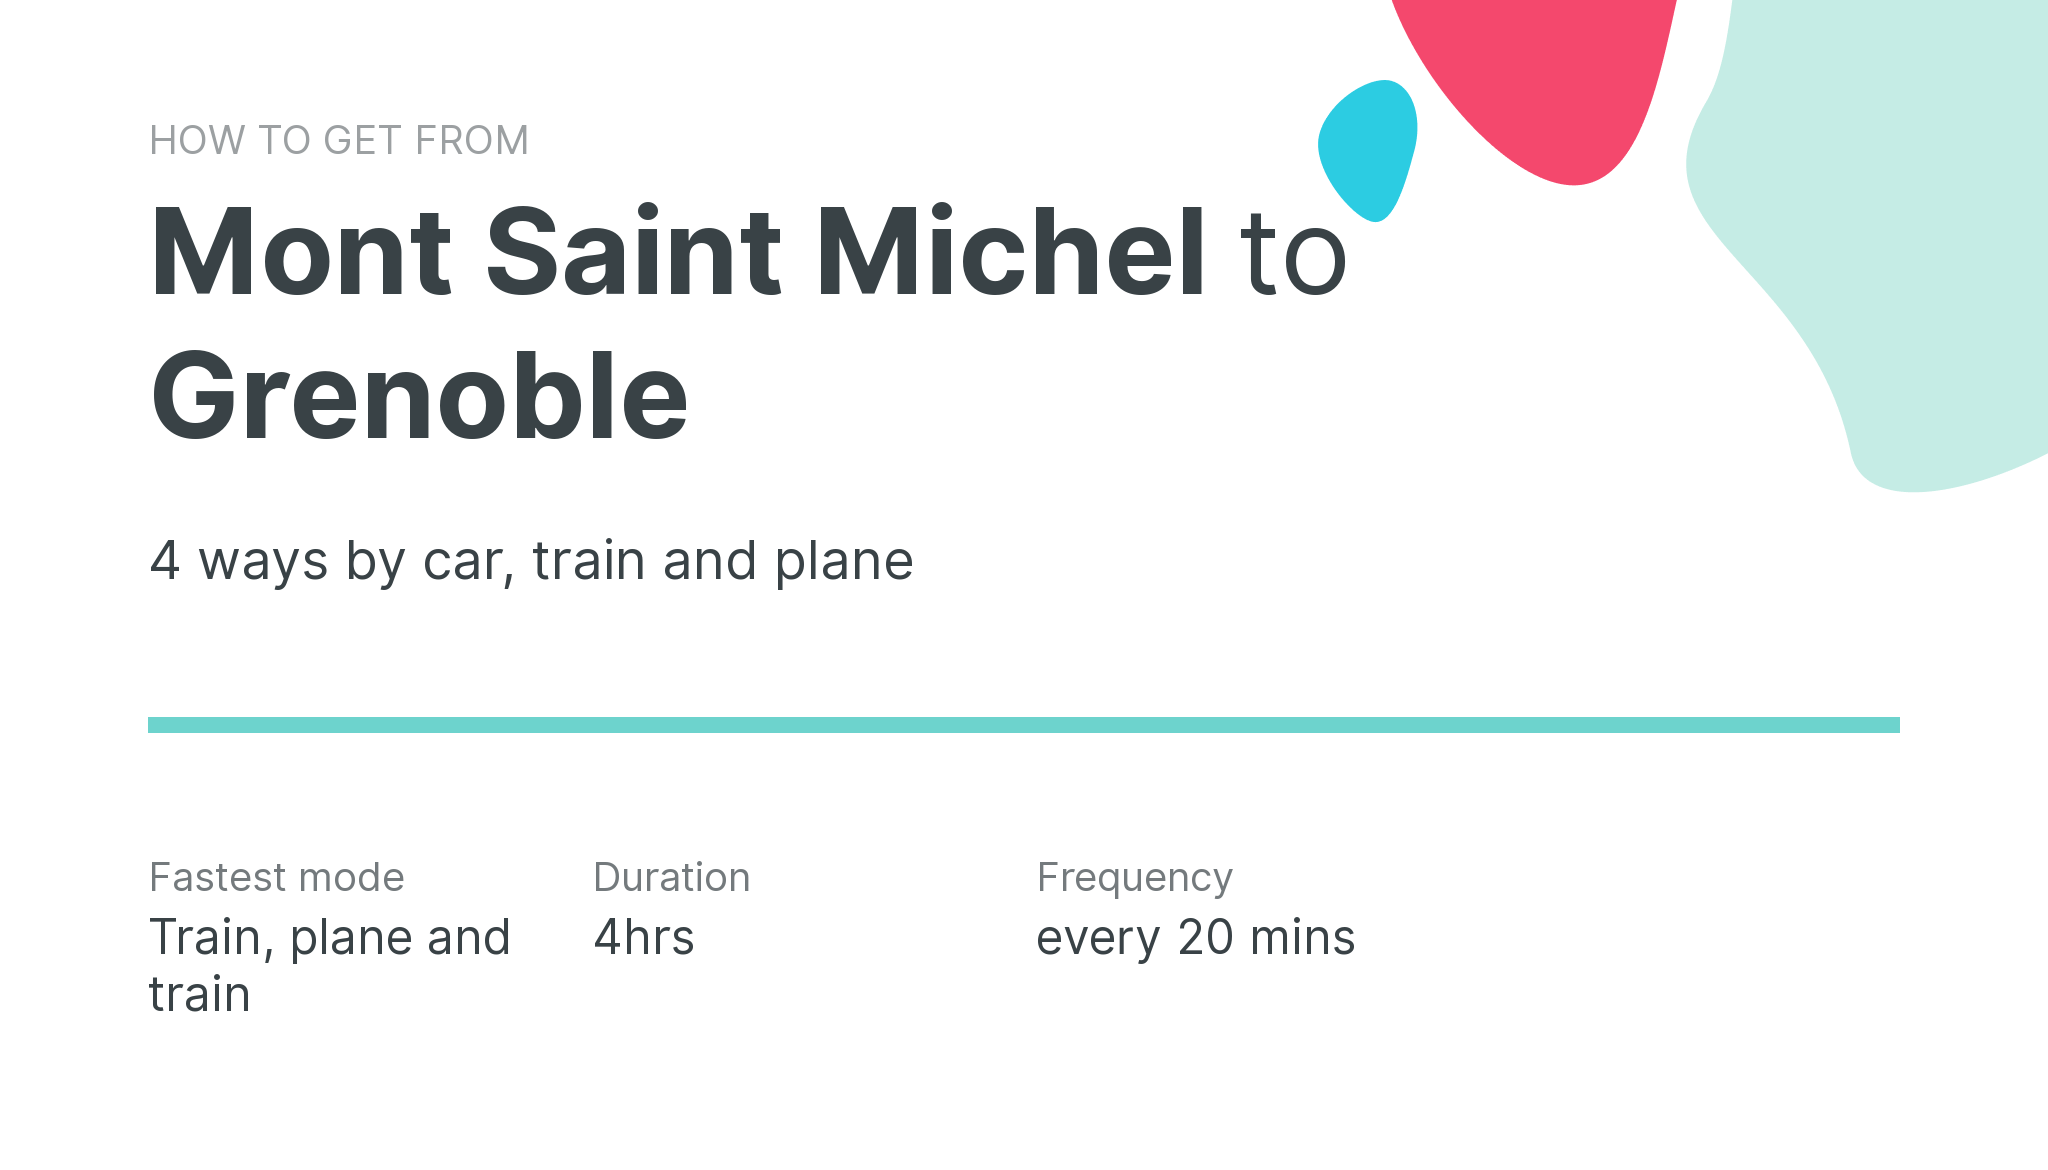 How do I get from Mont Saint Michel to Grenoble